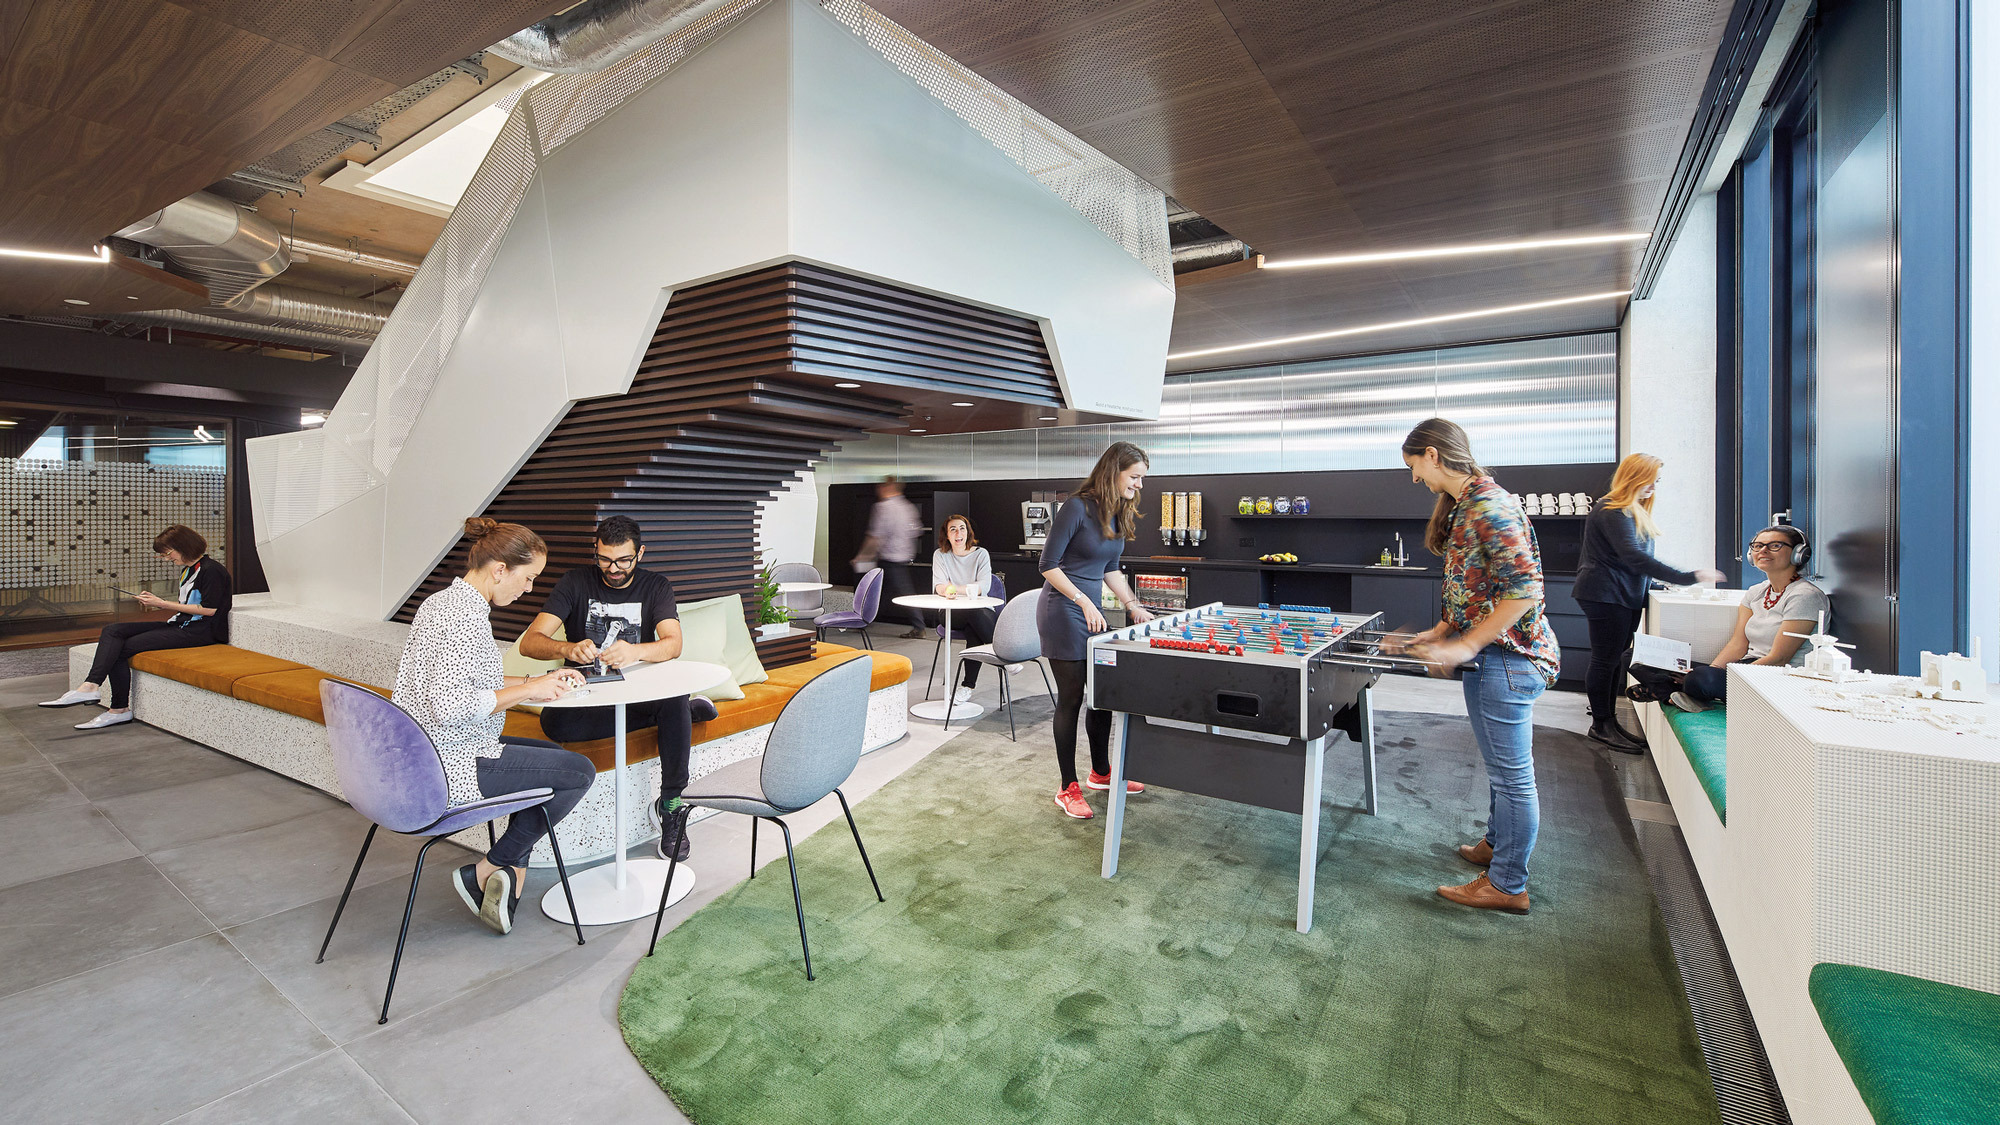 Modern open-plan office space with a variety of seating arrangements featuring eclectic furniture. Employees engage casually around a foosball table. Overhead, exposed ductwork complements the industrial-chic aesthetic, while vibrant green carpeting adds a pop of color, aiding in zone delineation.